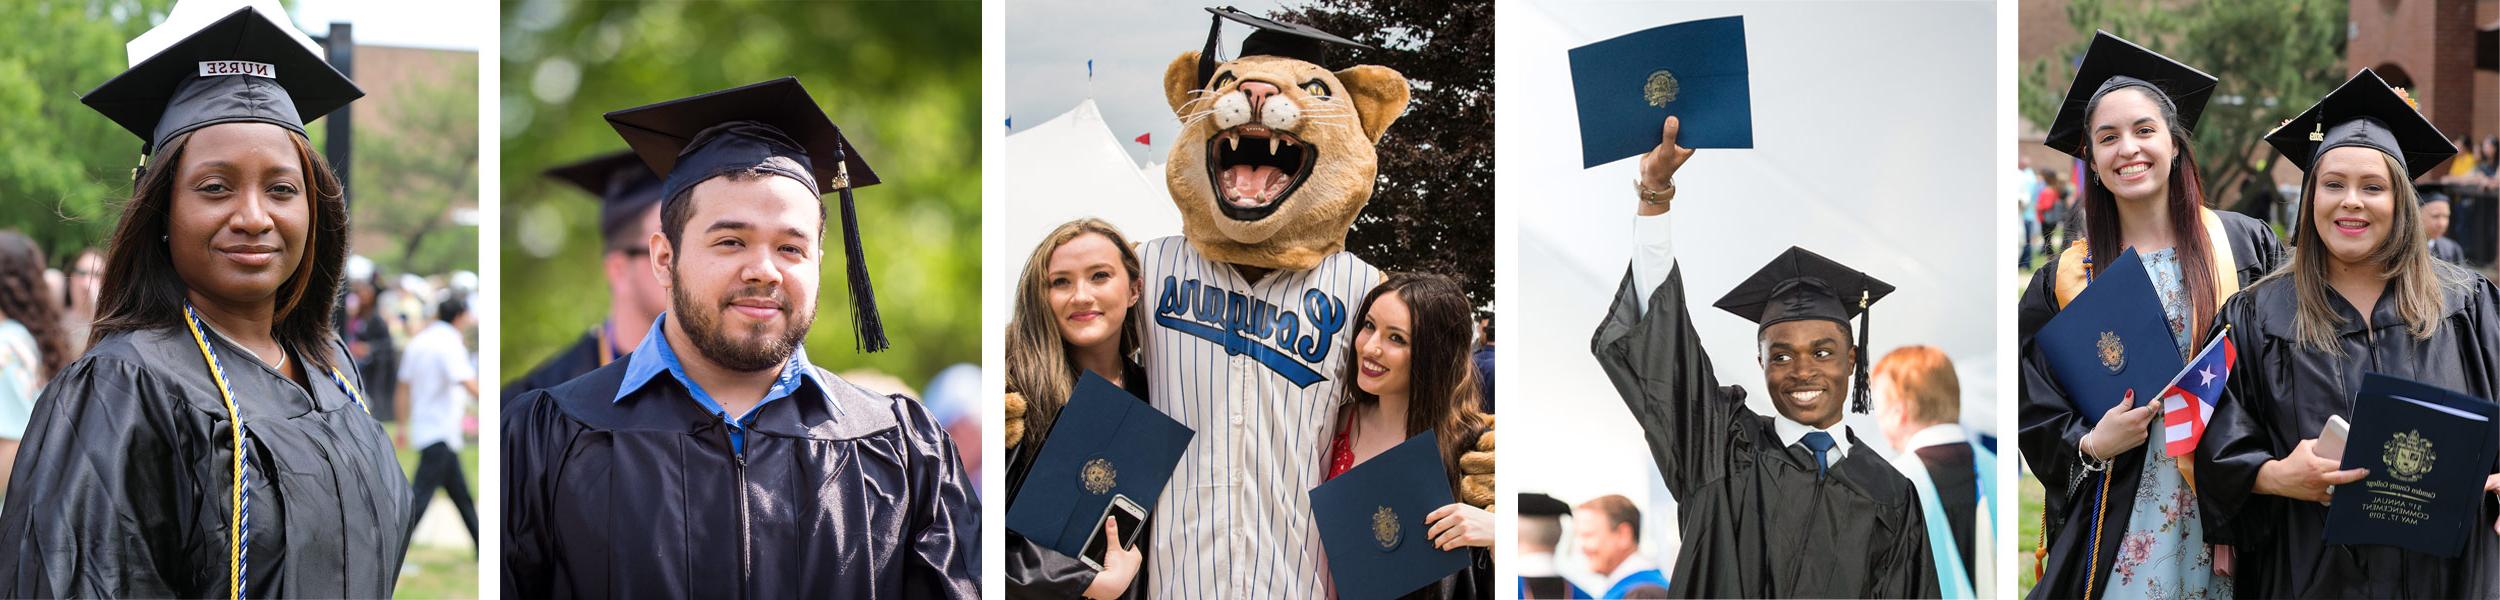 a group of photos showing diverse graduates from previous commencement day ceremonies